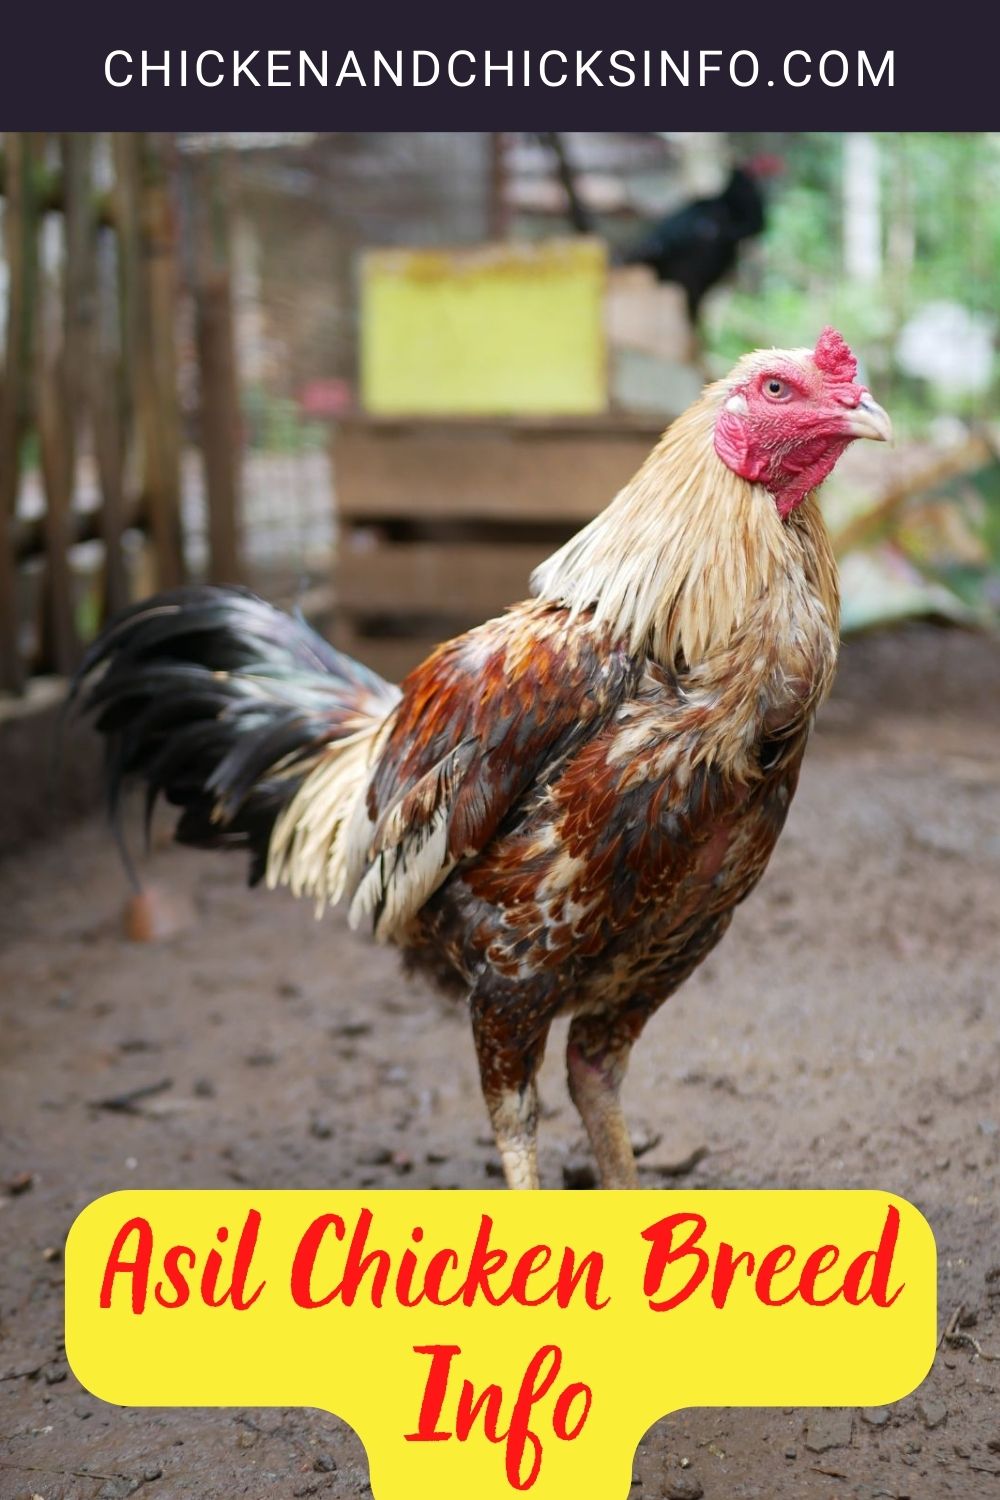 Asil Chicken Breed Info + Where to Buy pinterest image.